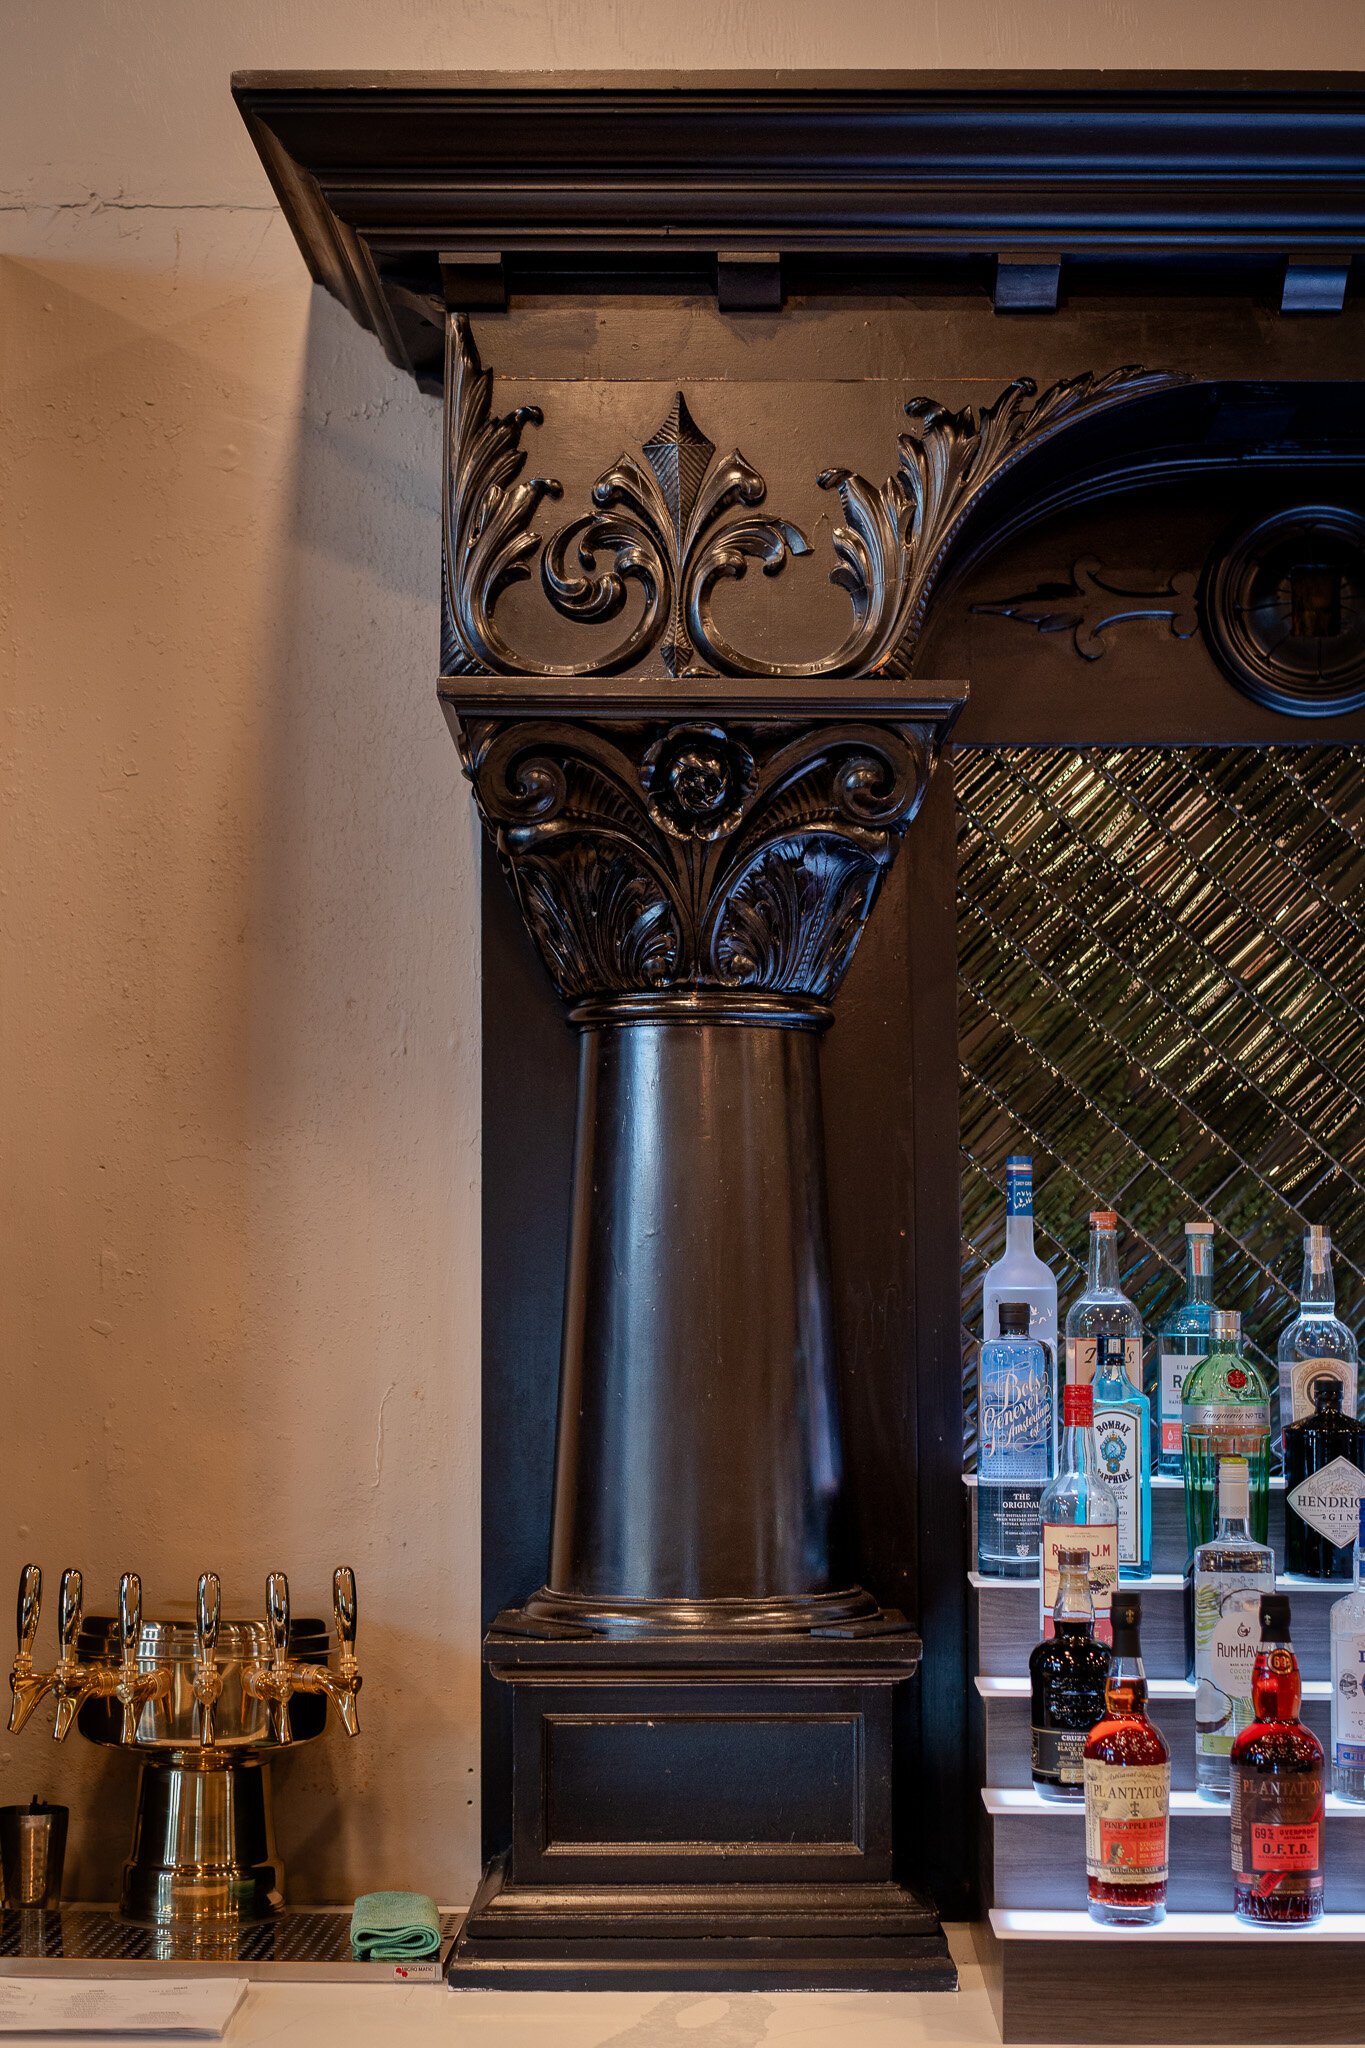 Details on the back bar, which was originally in Columbia Street West.